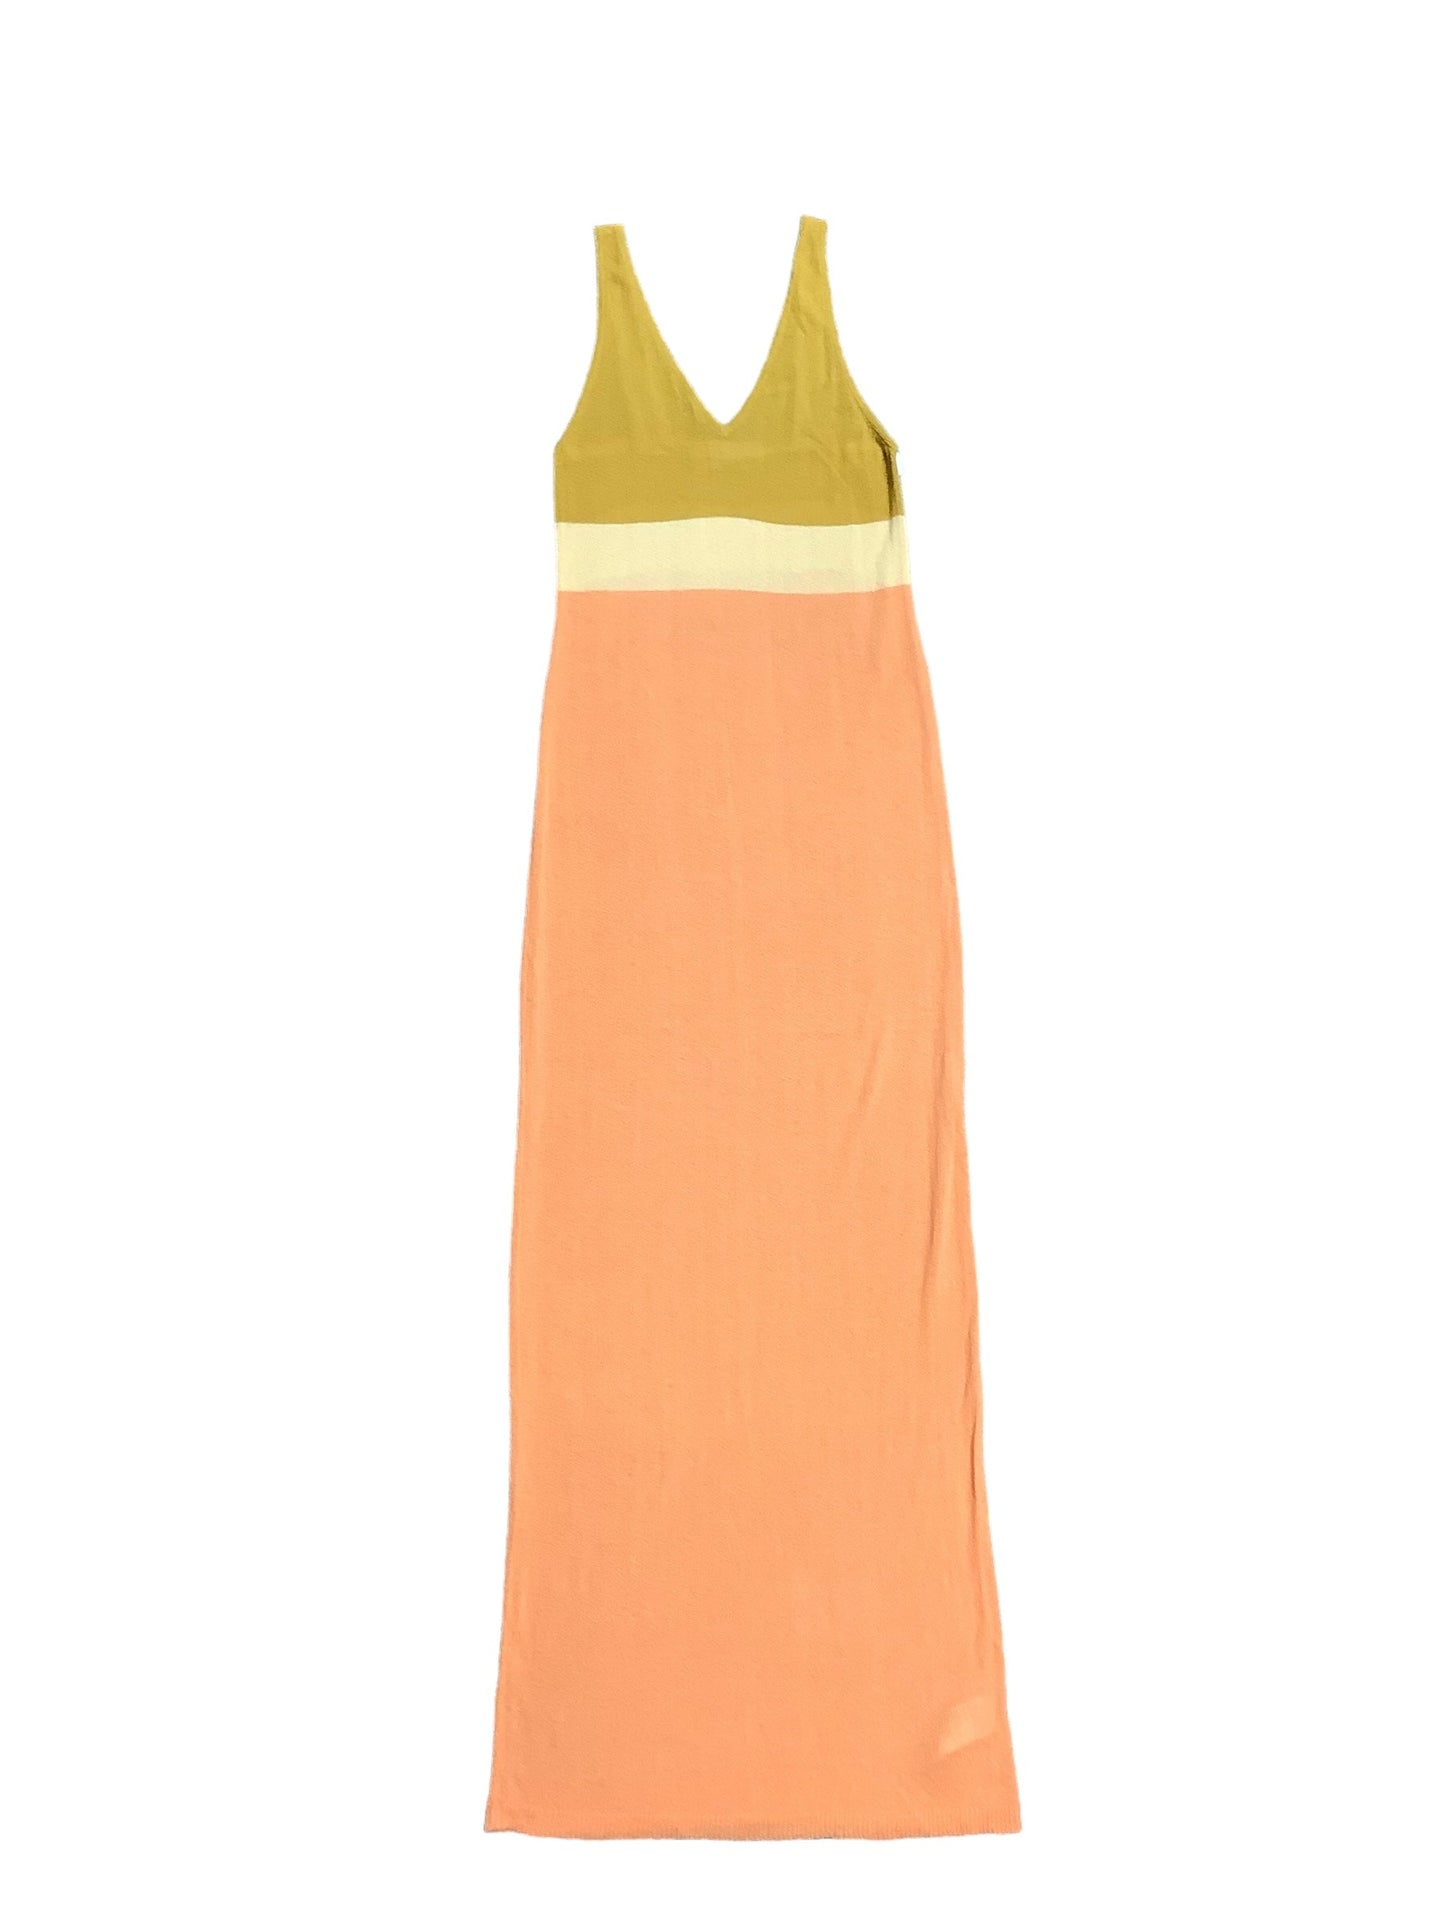 Yellow Dress Casual Maxi Free People, Size S